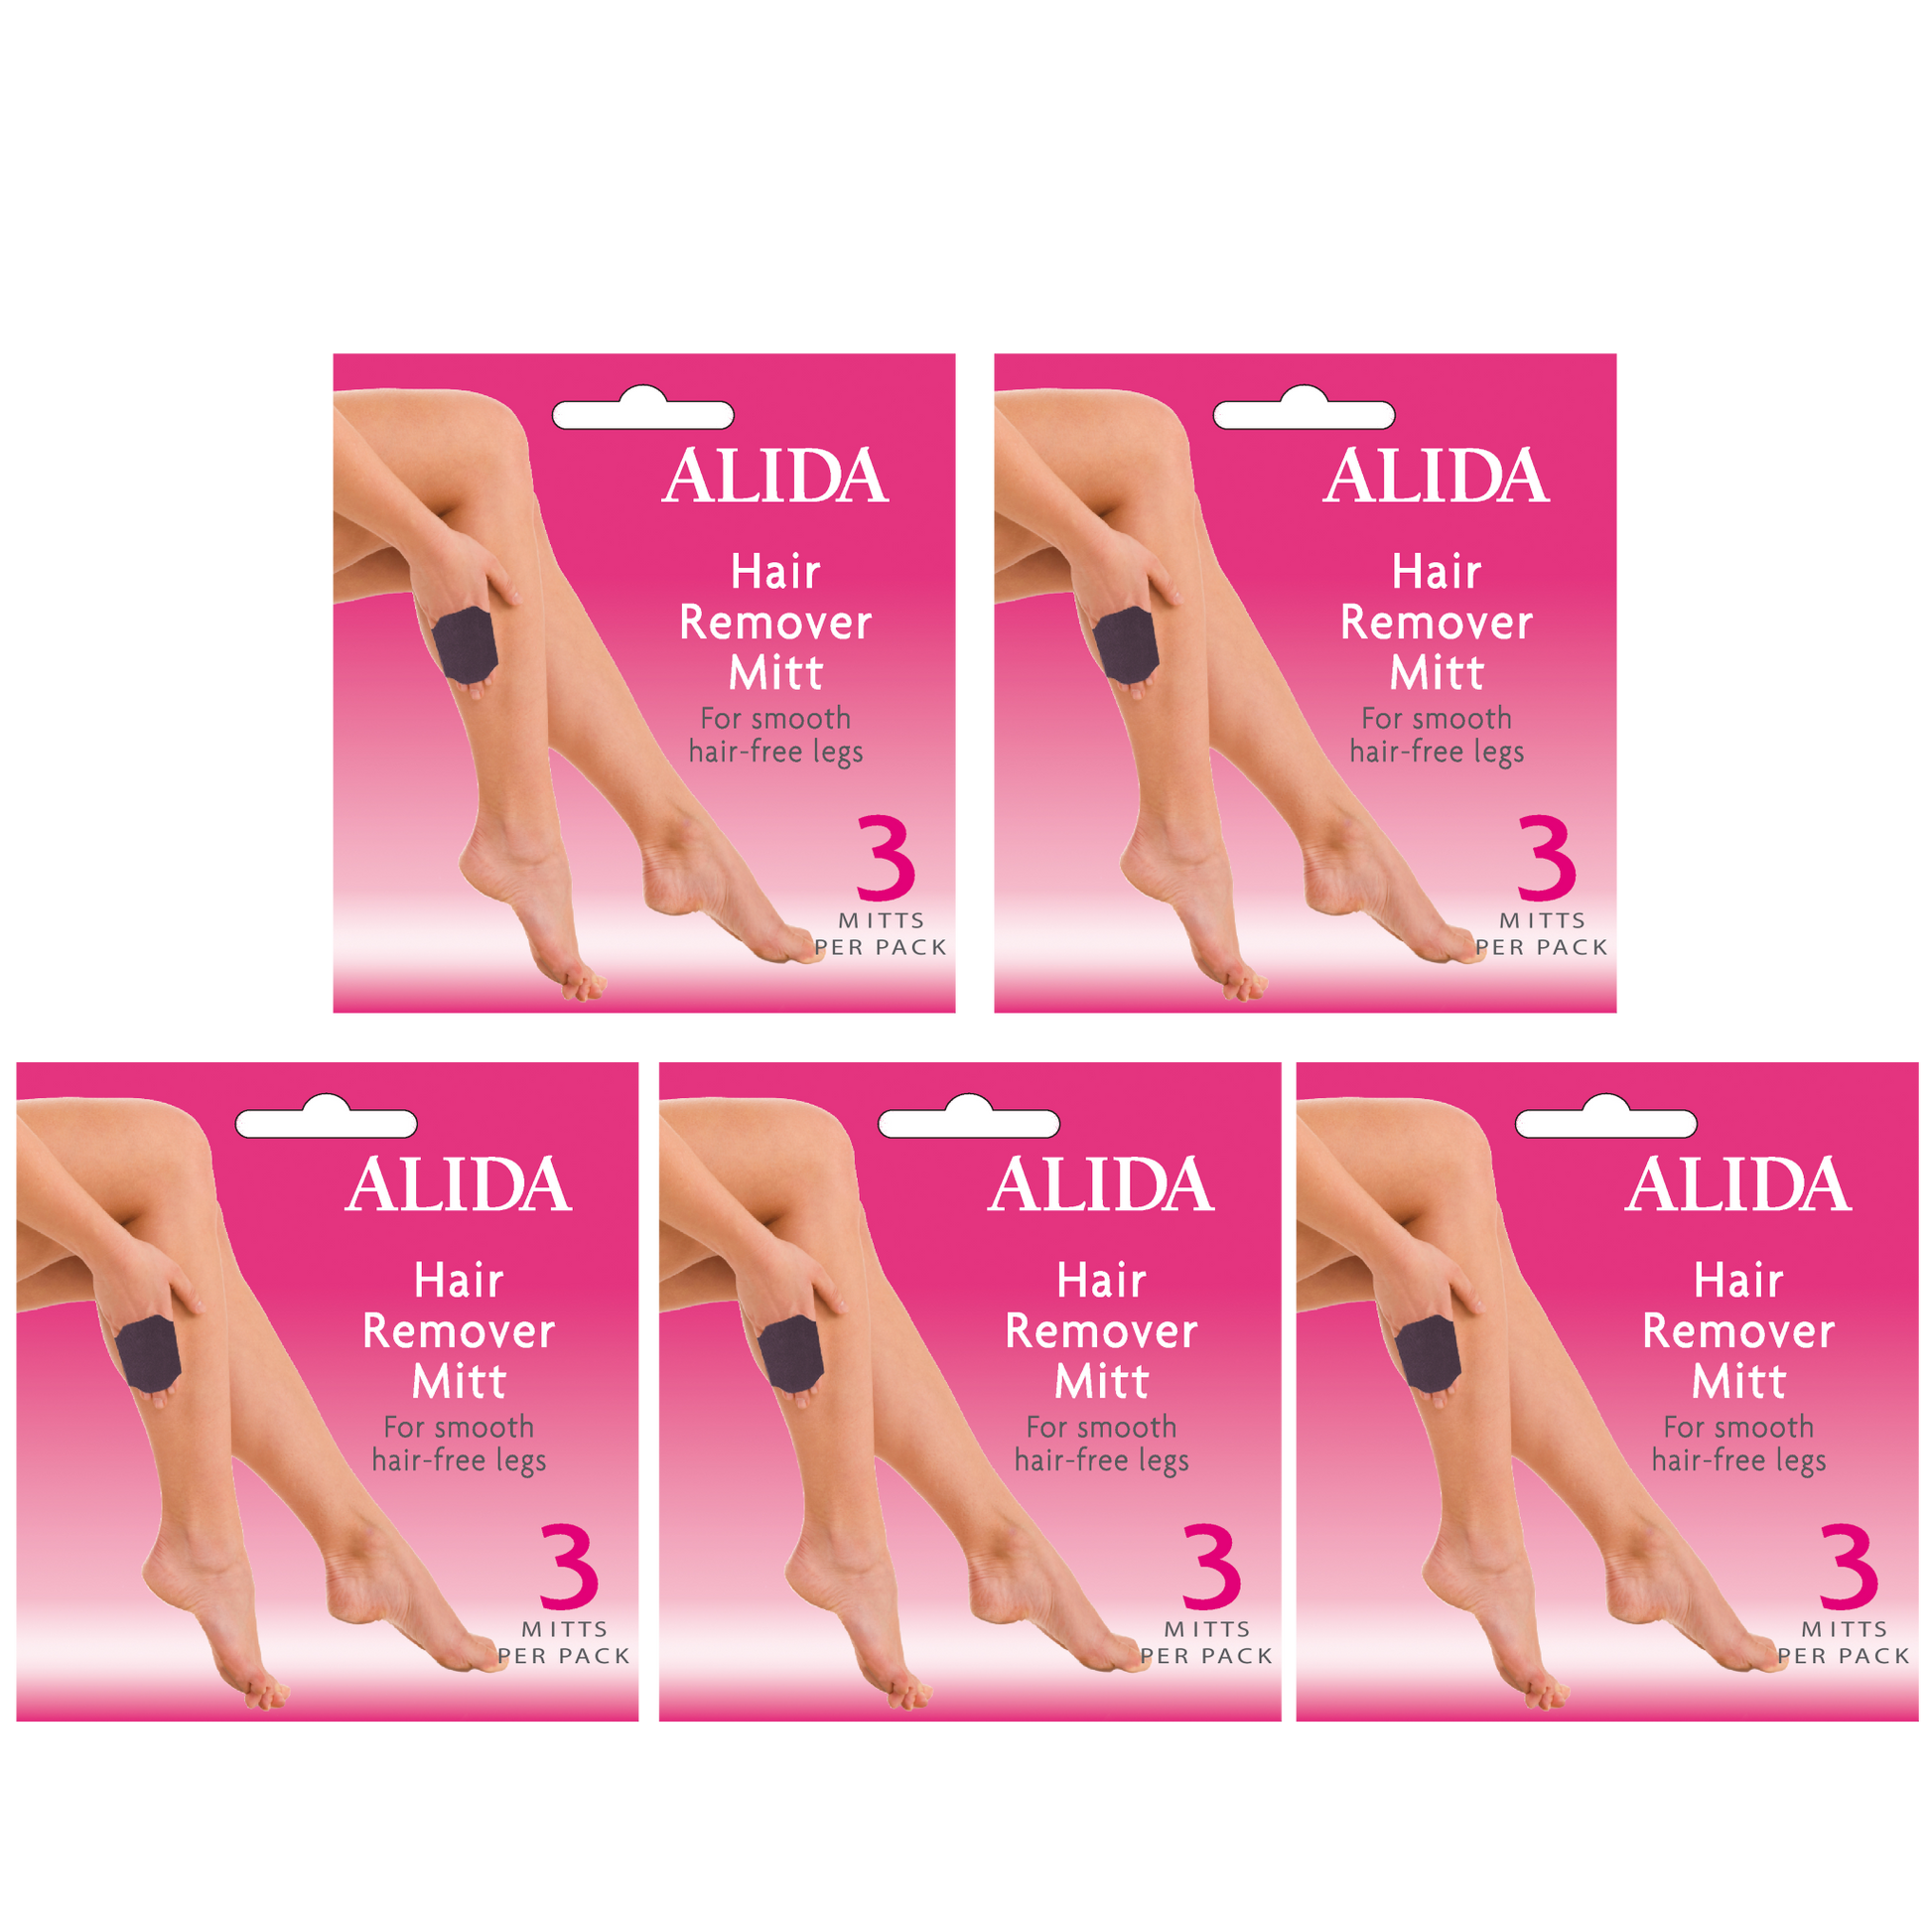 Alida Hair Remover Mitt for smooth hair-free legs from Alida.co.uk Buy a Multi-Pack and save